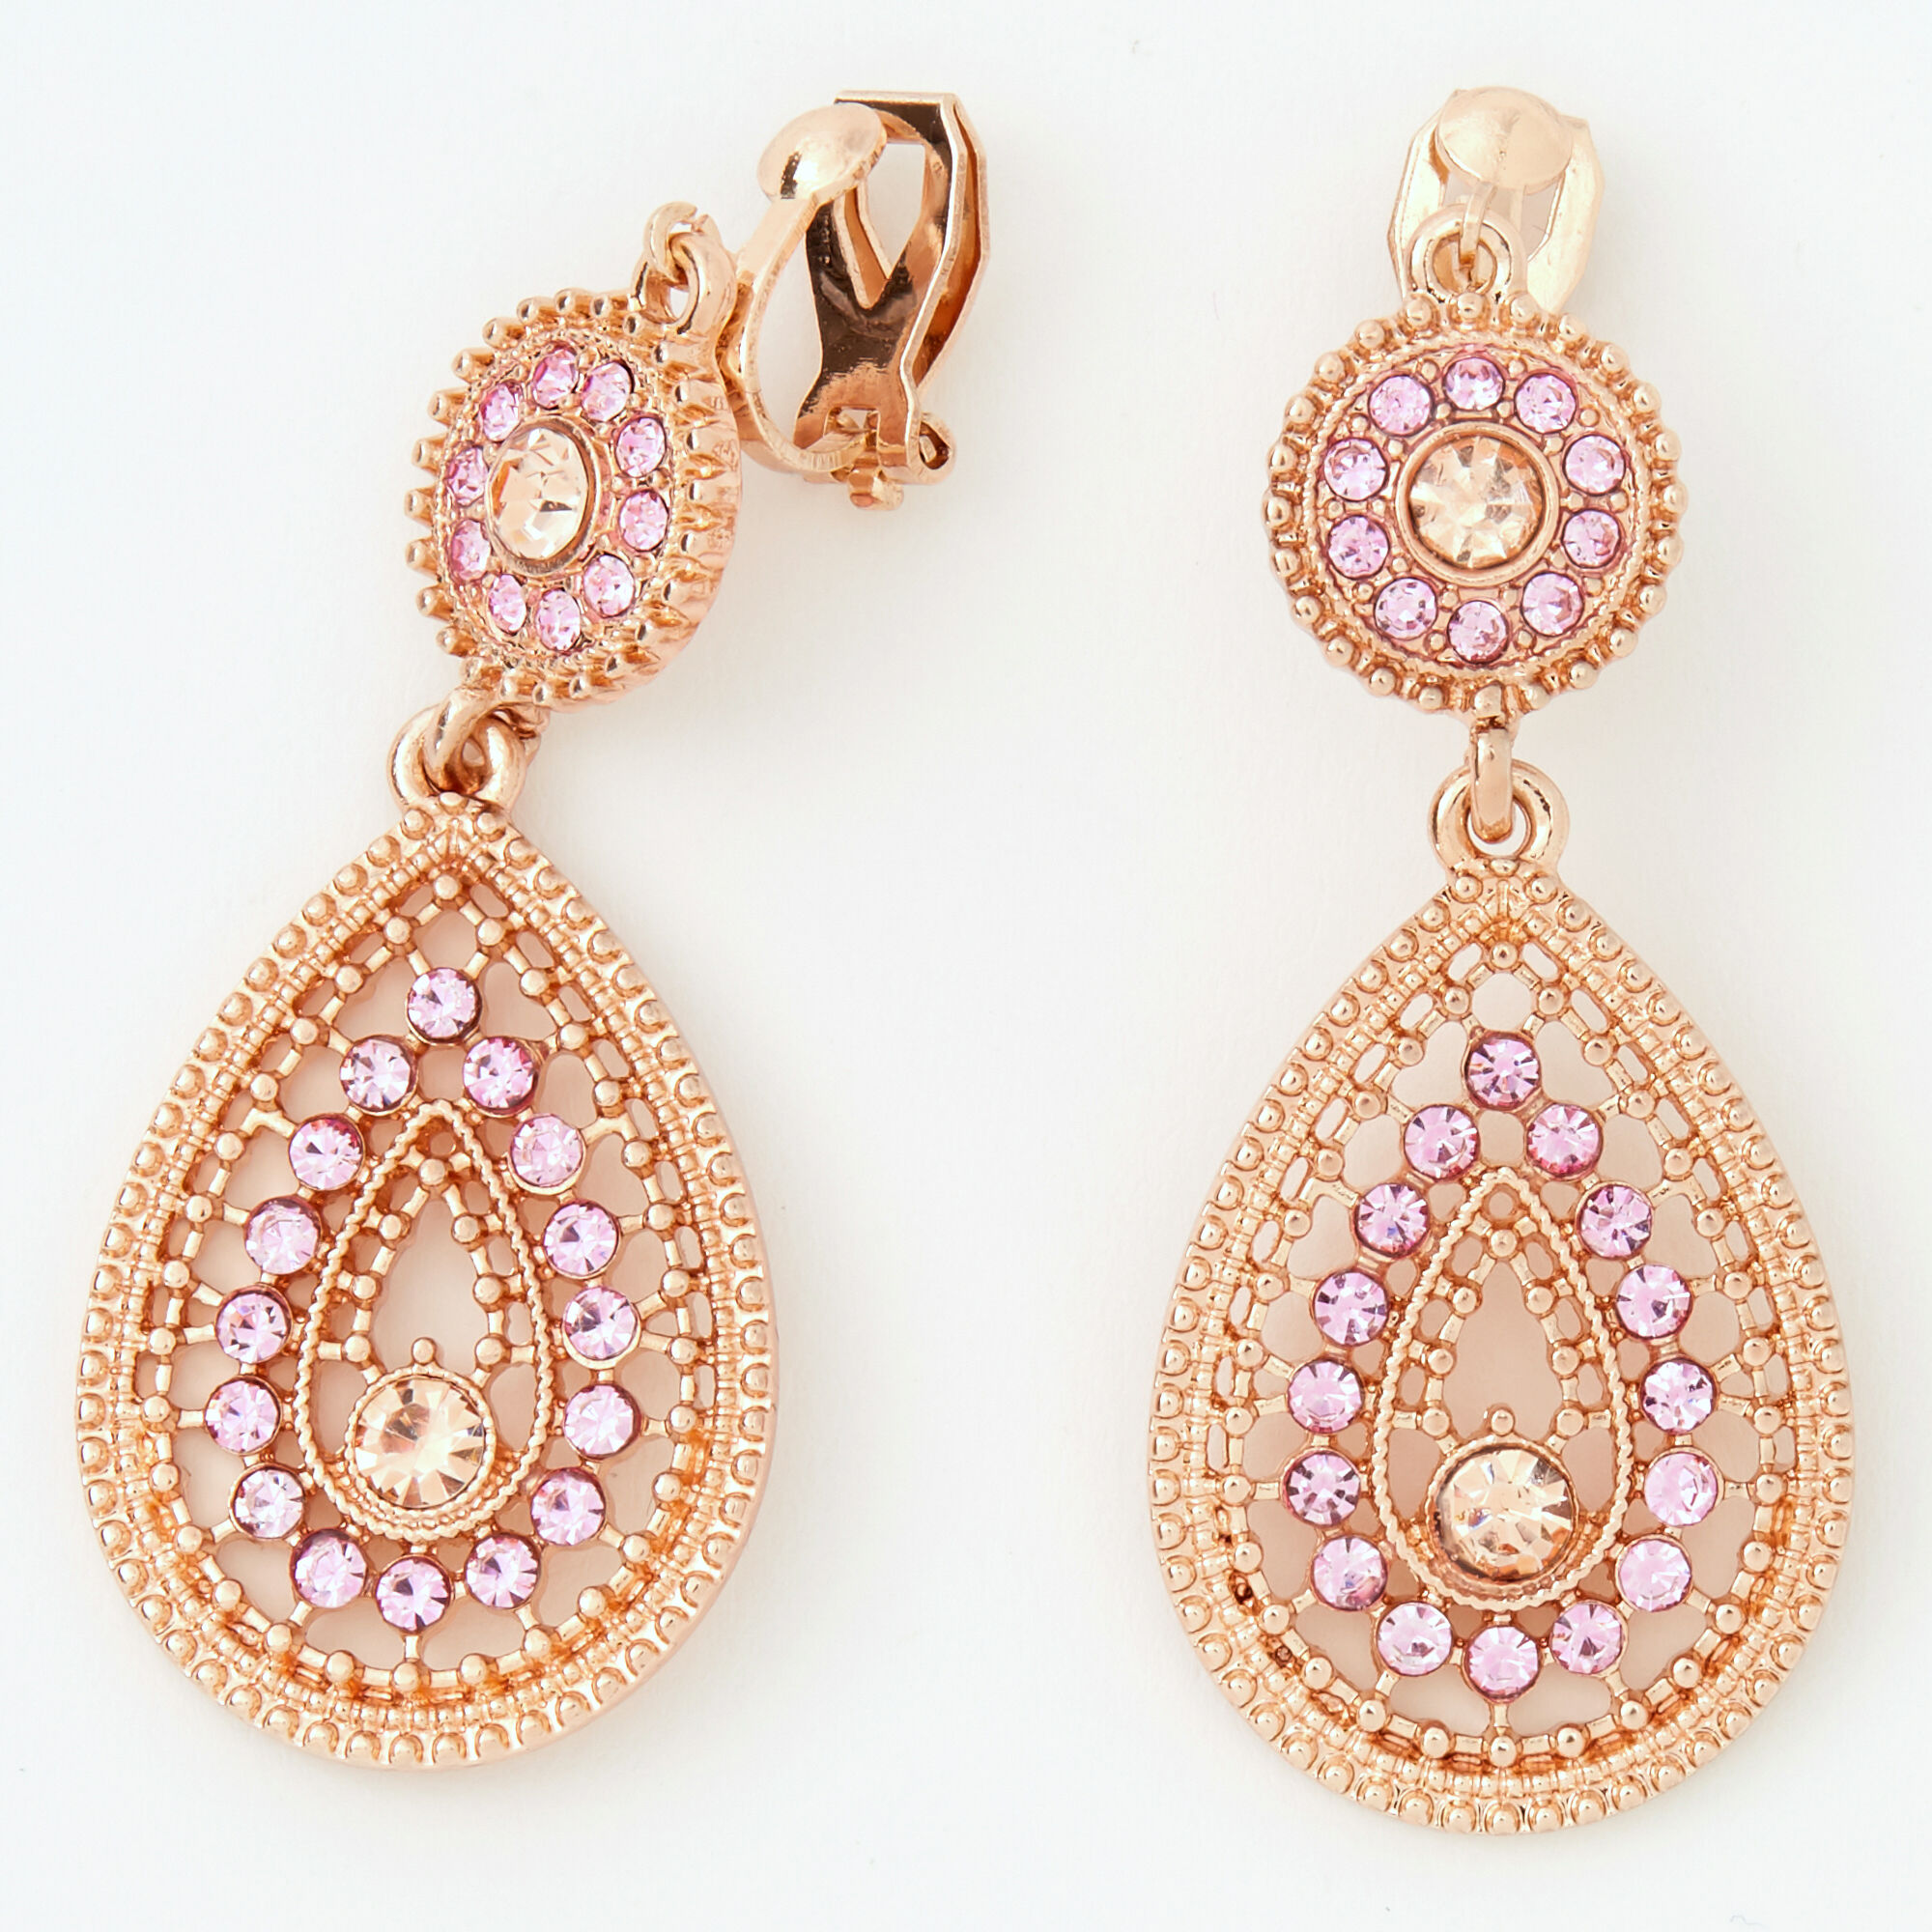 View Claires Rose Gold 2 Teardrop Clip On Drop Earrings Pink information